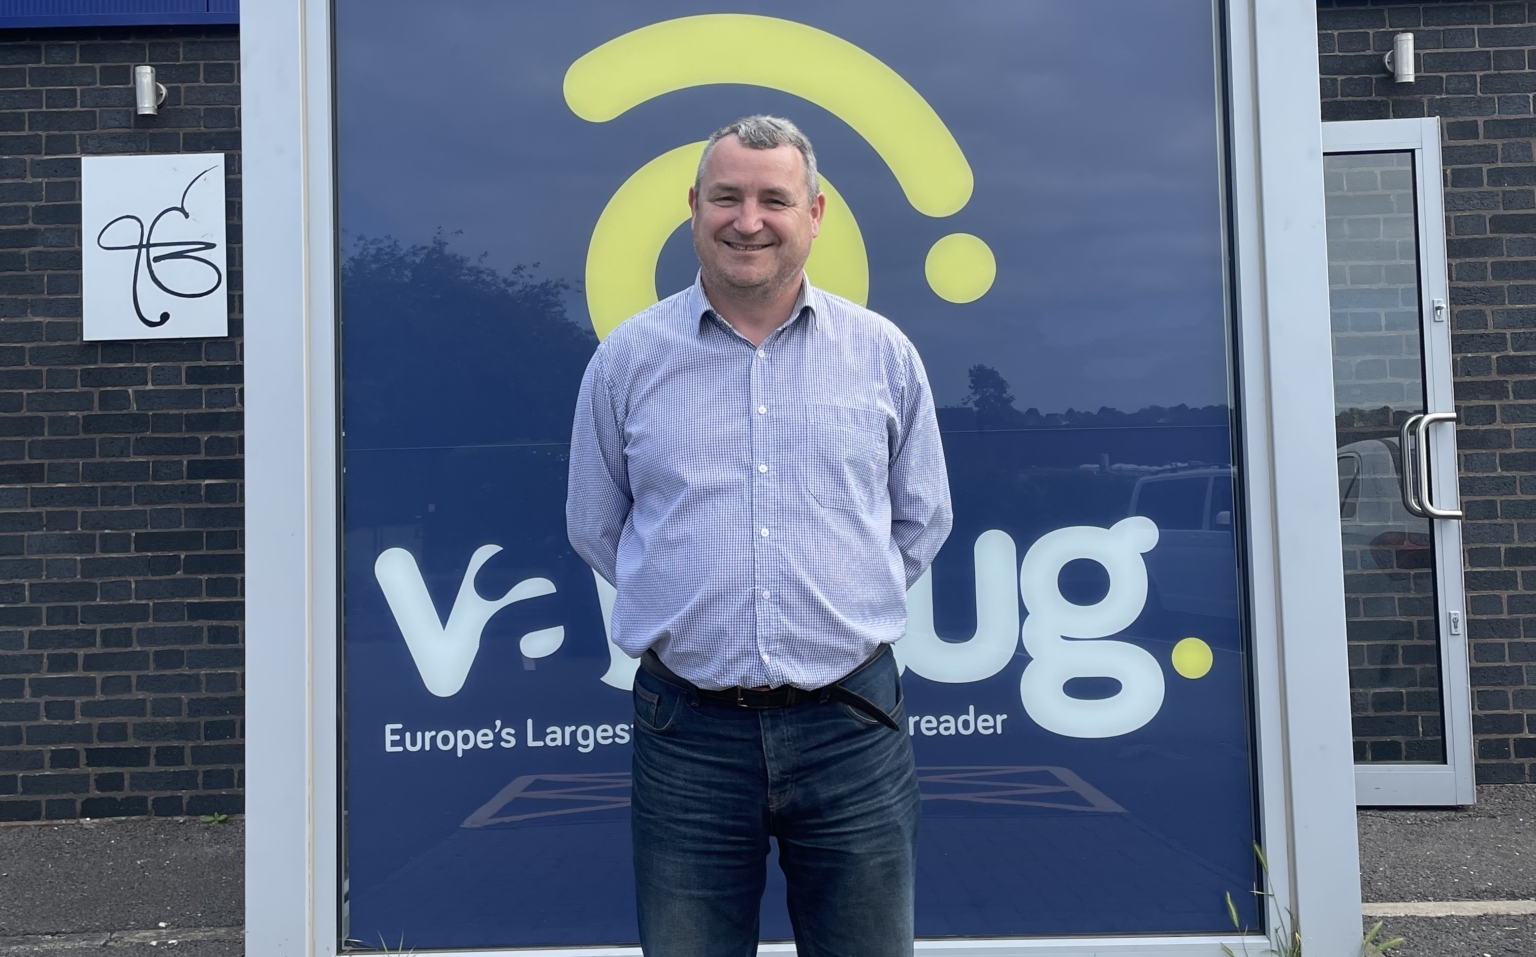 Vaculug supports ‘major OTR growth’ with new sales manager appointment